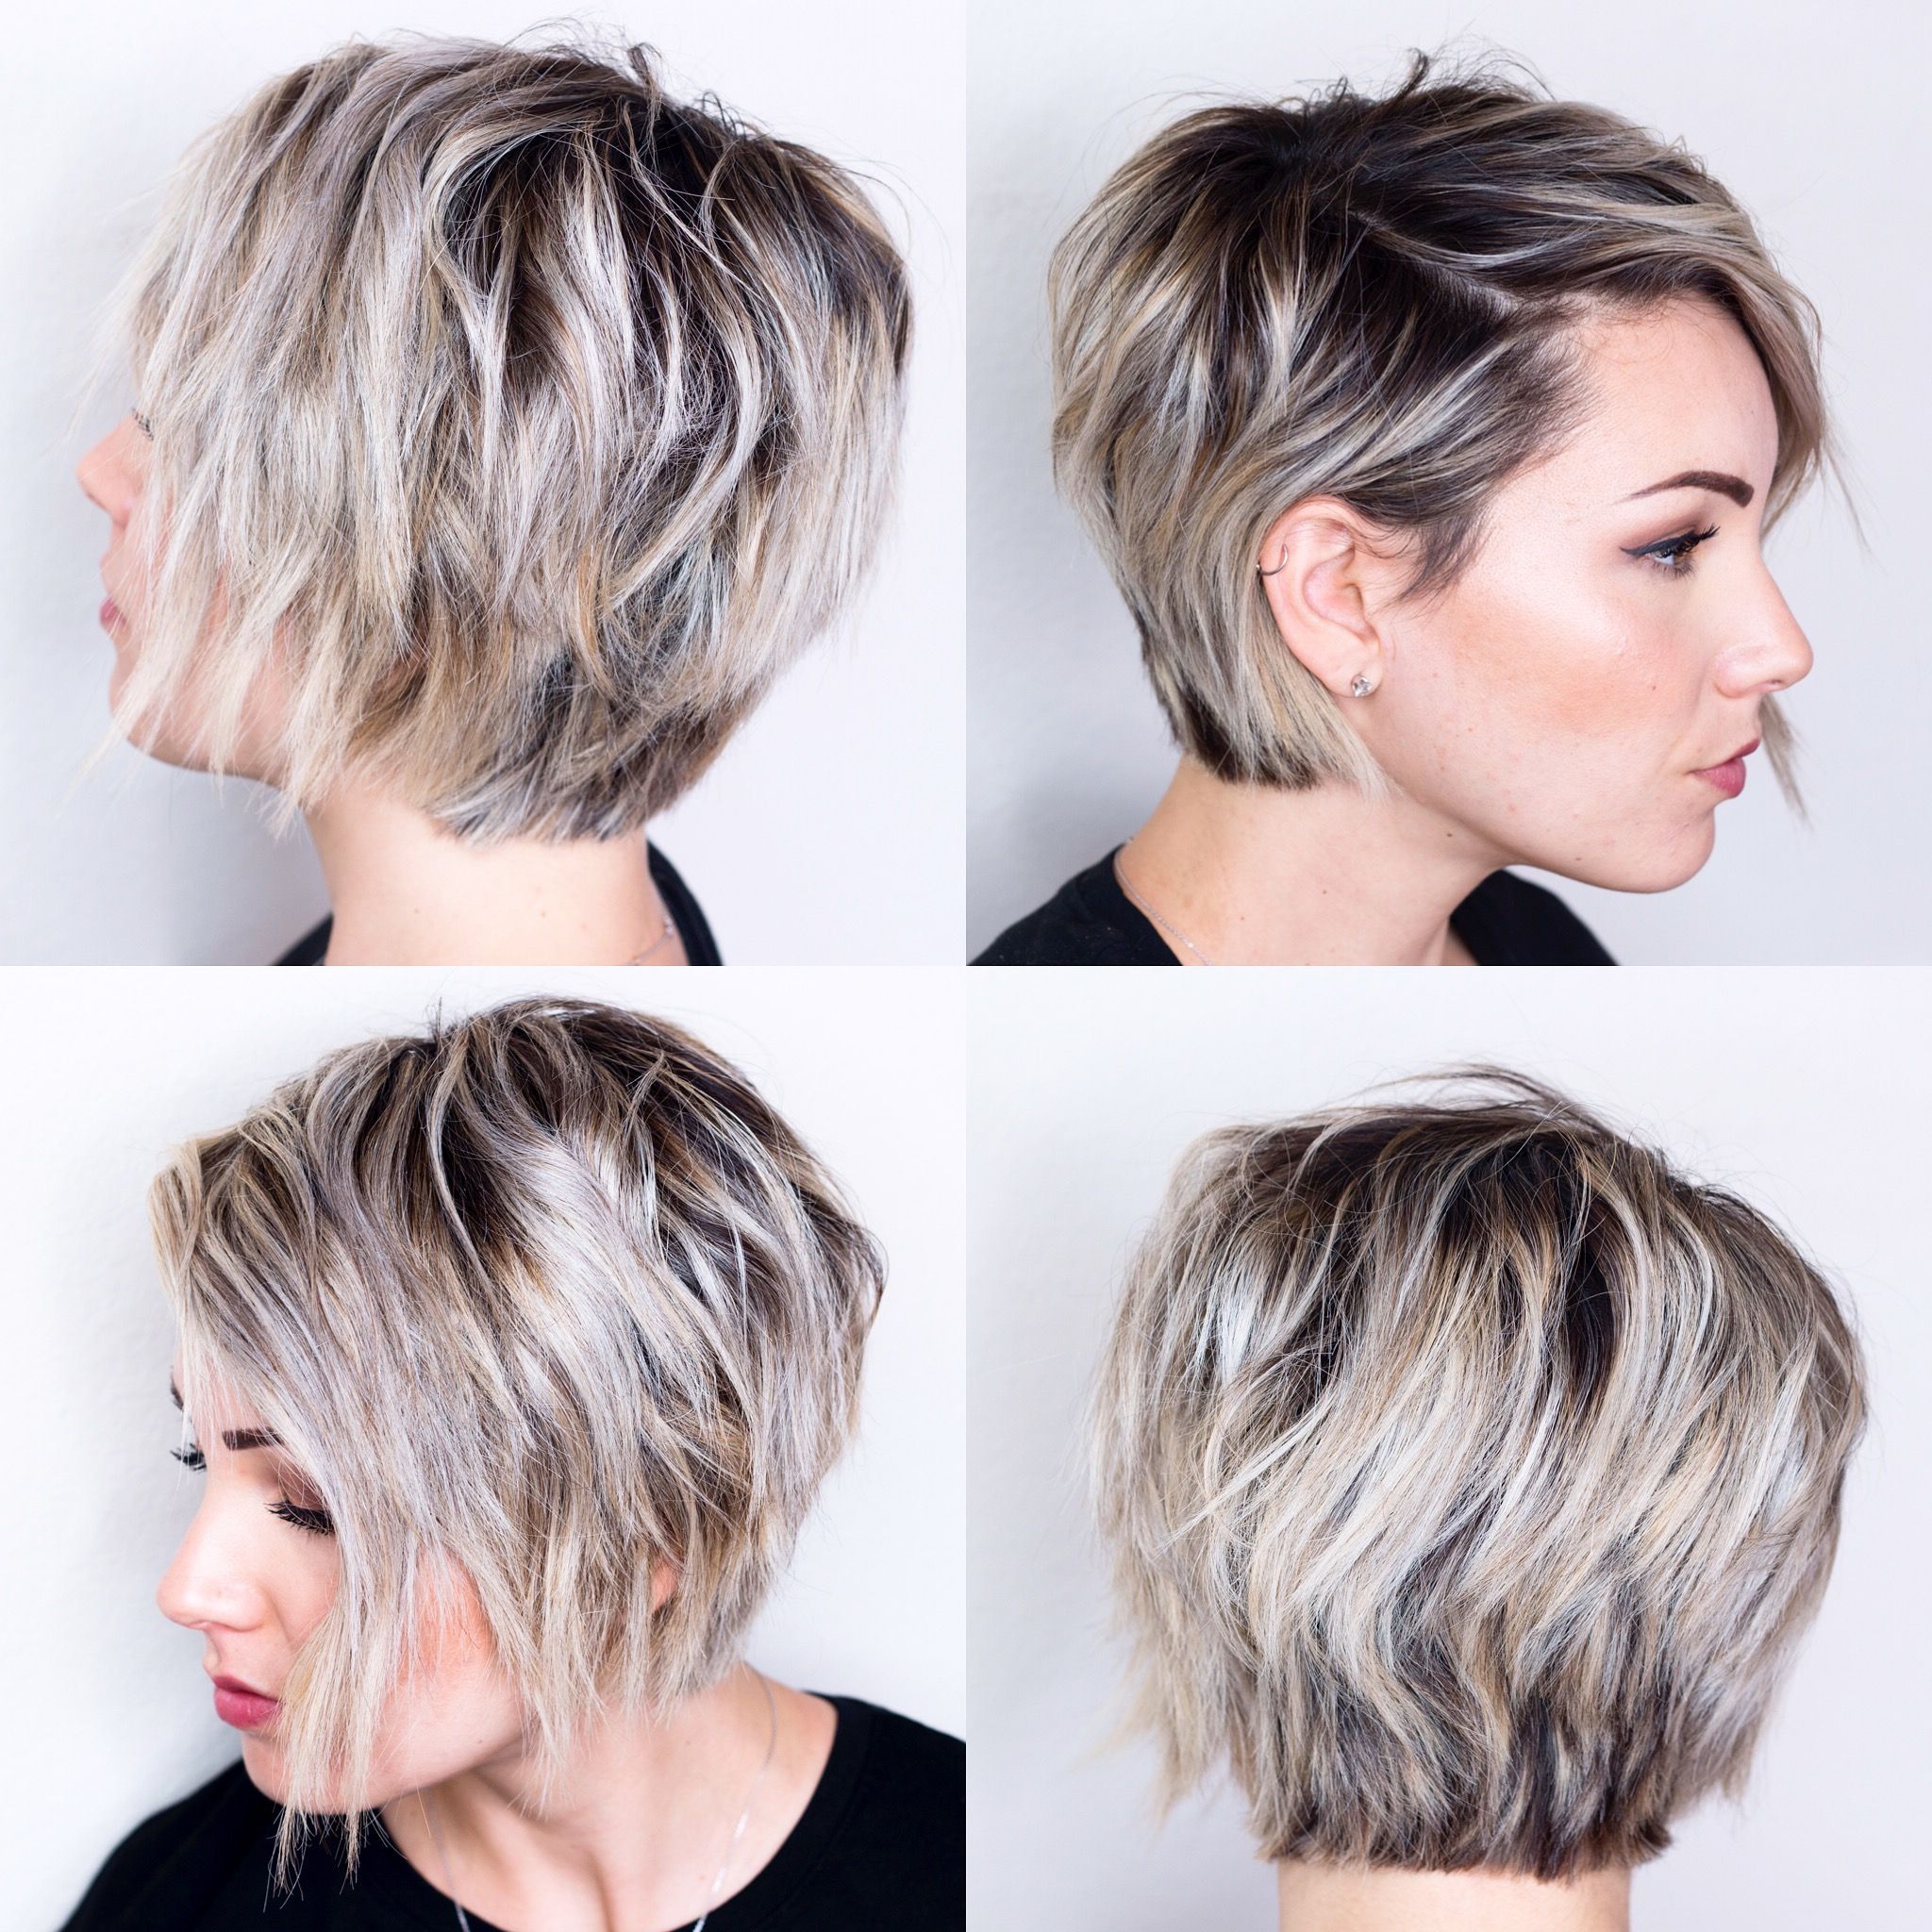 360 View Of Short Hair | H A I R In 2018 | Pinterest | Short Hair Intended For Short Haircut Oval Face (Photo 3 of 25)